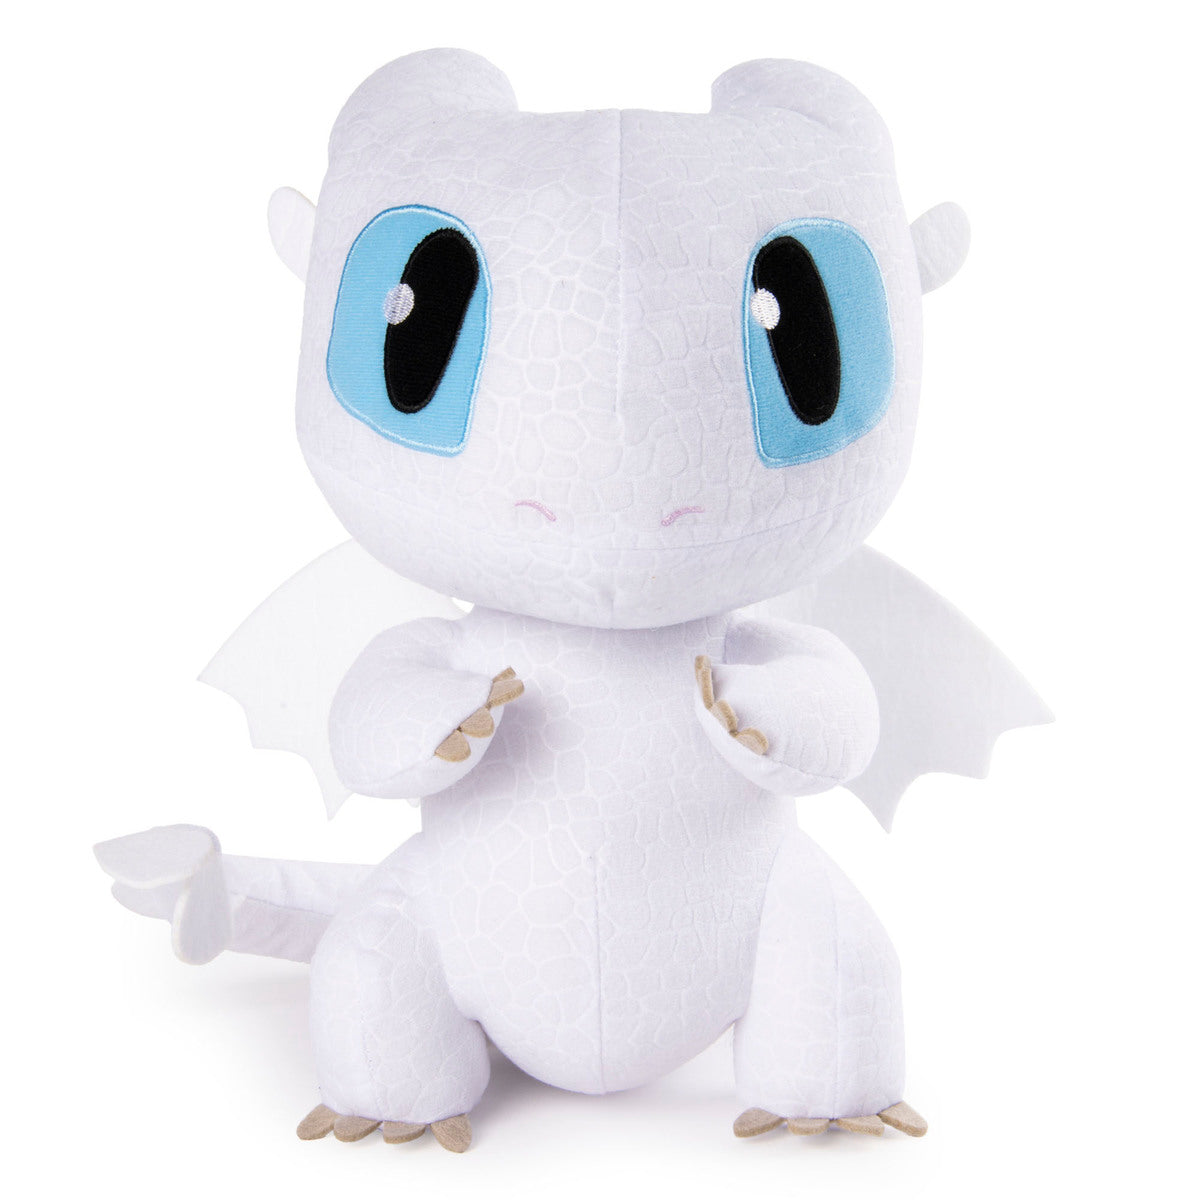 DreamWorks Dragons - Squeeze & Growl 25cm Plush (Styles Vary)